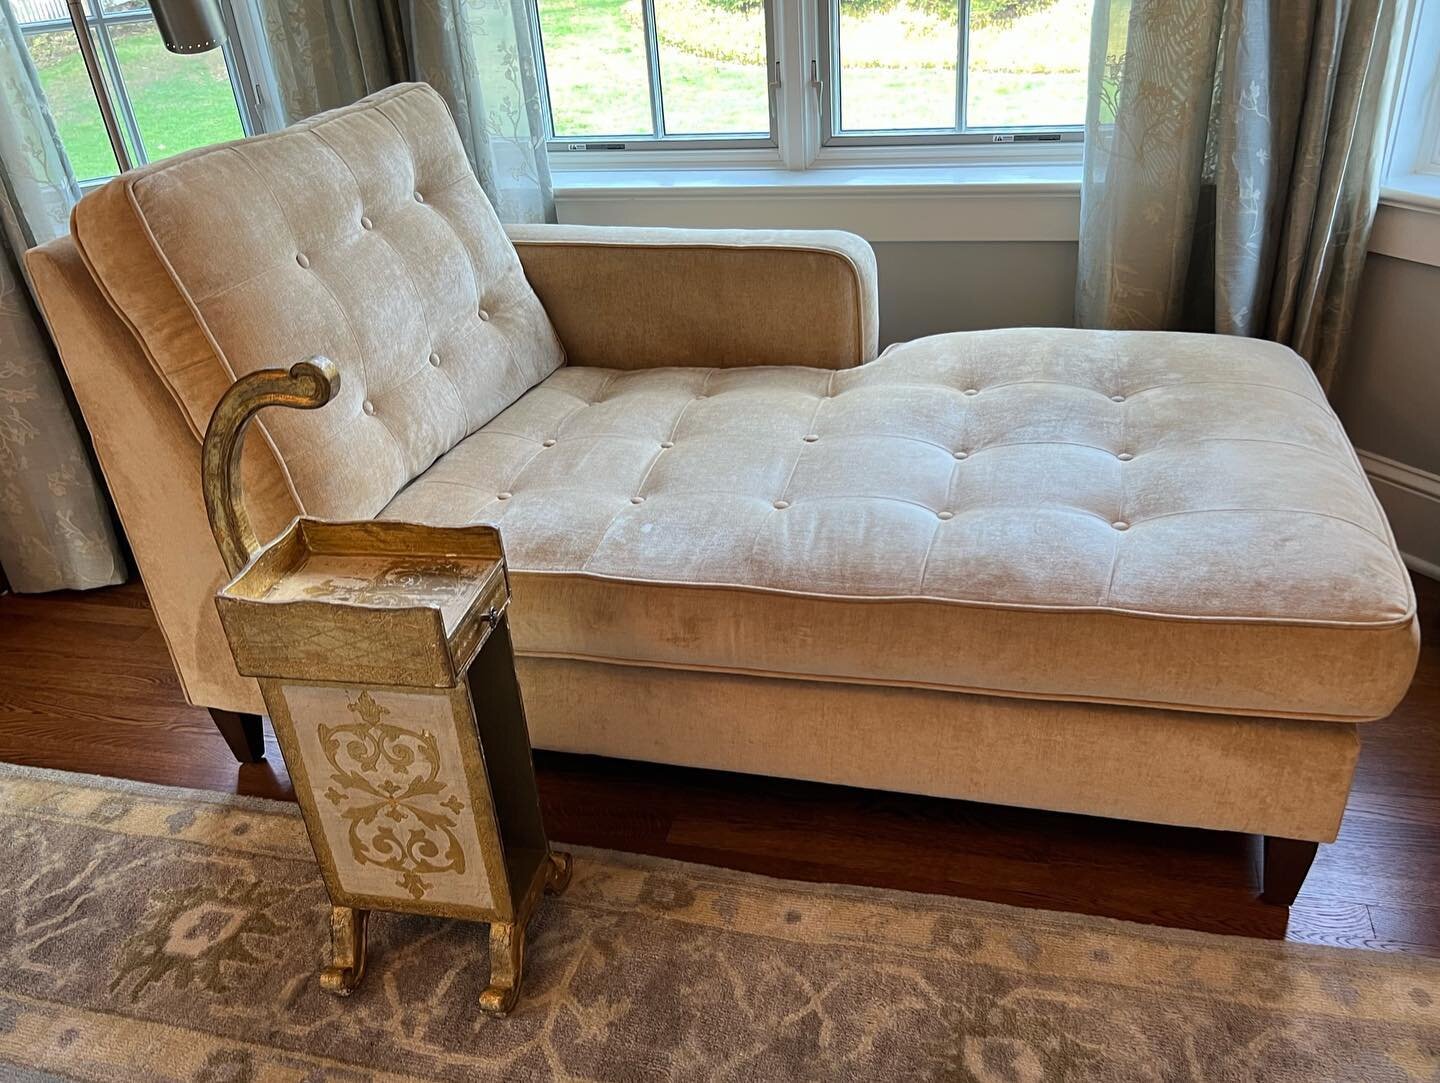 Perfect spot to rest, relax and read a book!Chaise lounge is 36w x 52.5sd x 19sh x 33.5h $550 Petite Side Table/Book Stand
7.25w x 21h to top of table, 32 full height x 12 deep $125 #emptyyournest #chaiselounge #readingnook #interiordesign #interiord